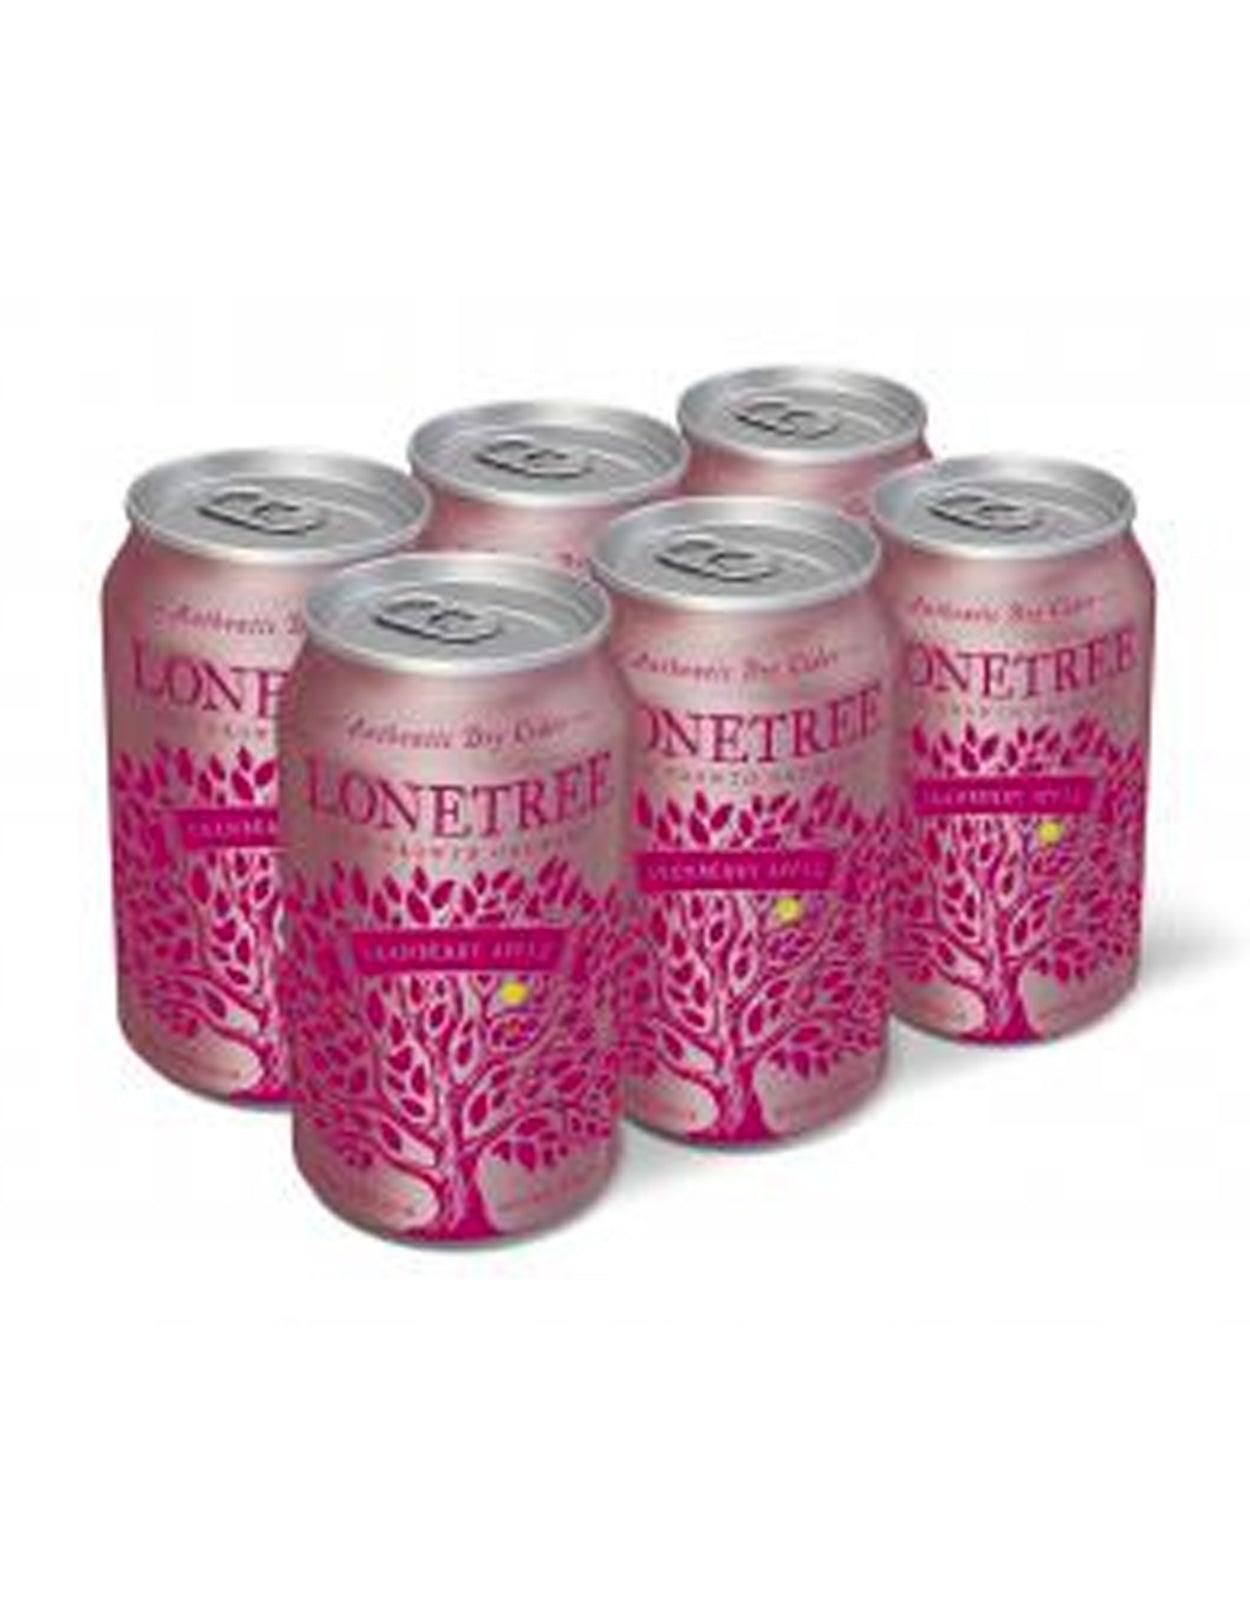 Lonetree Cranberry Apple Dry Cider 355 ml - 6 Cans